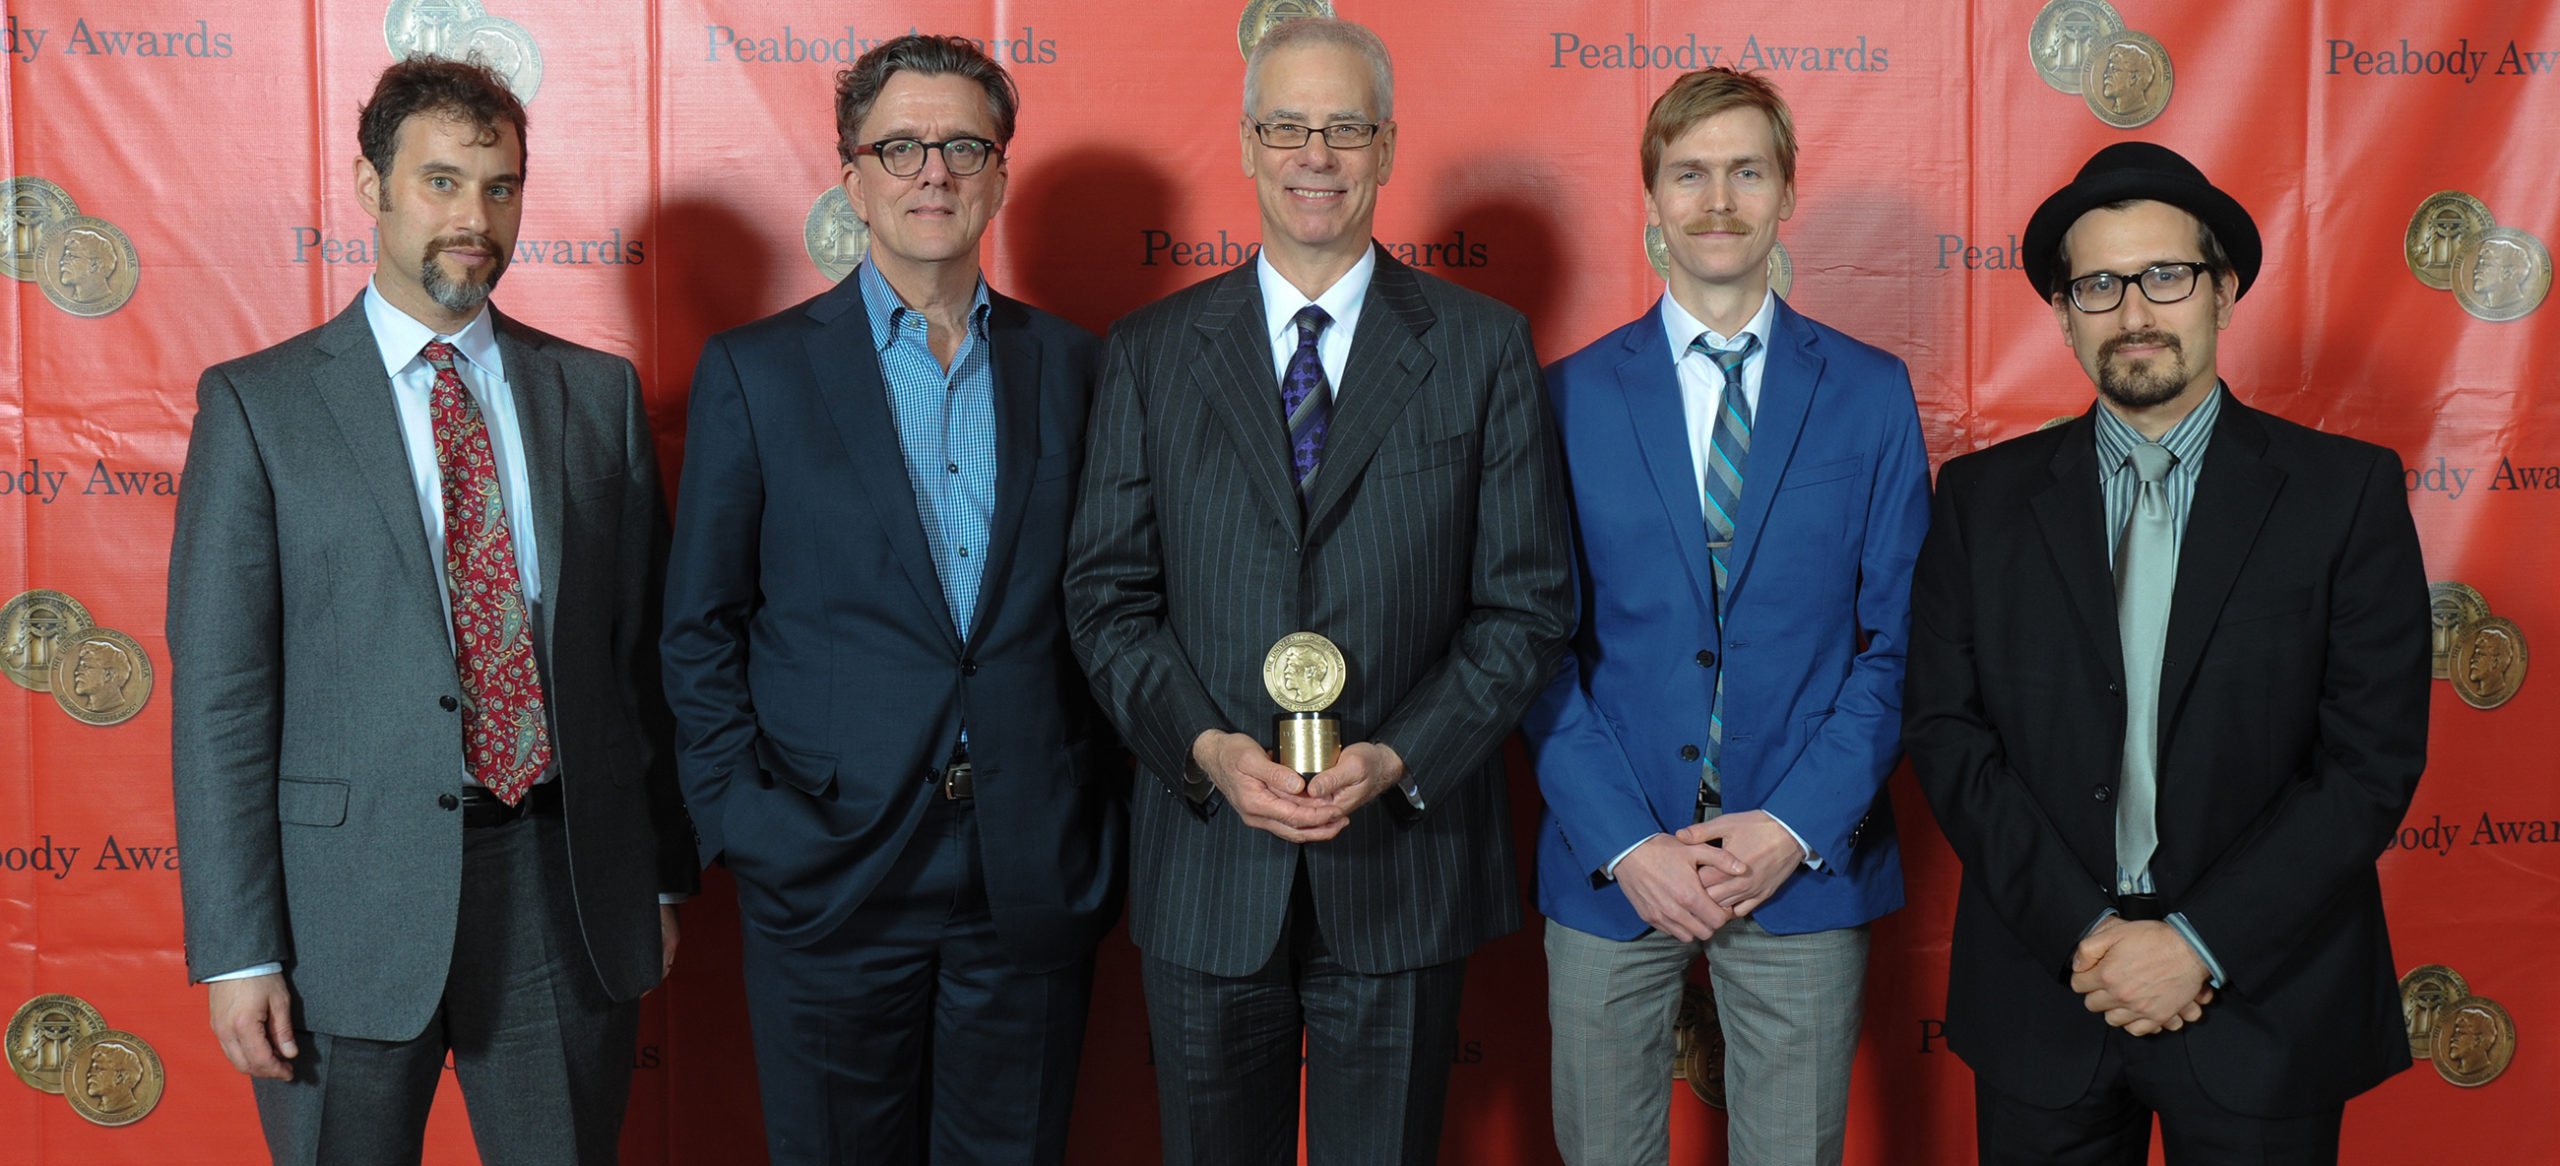 Inside the National Recording Registry The Peabody Awards